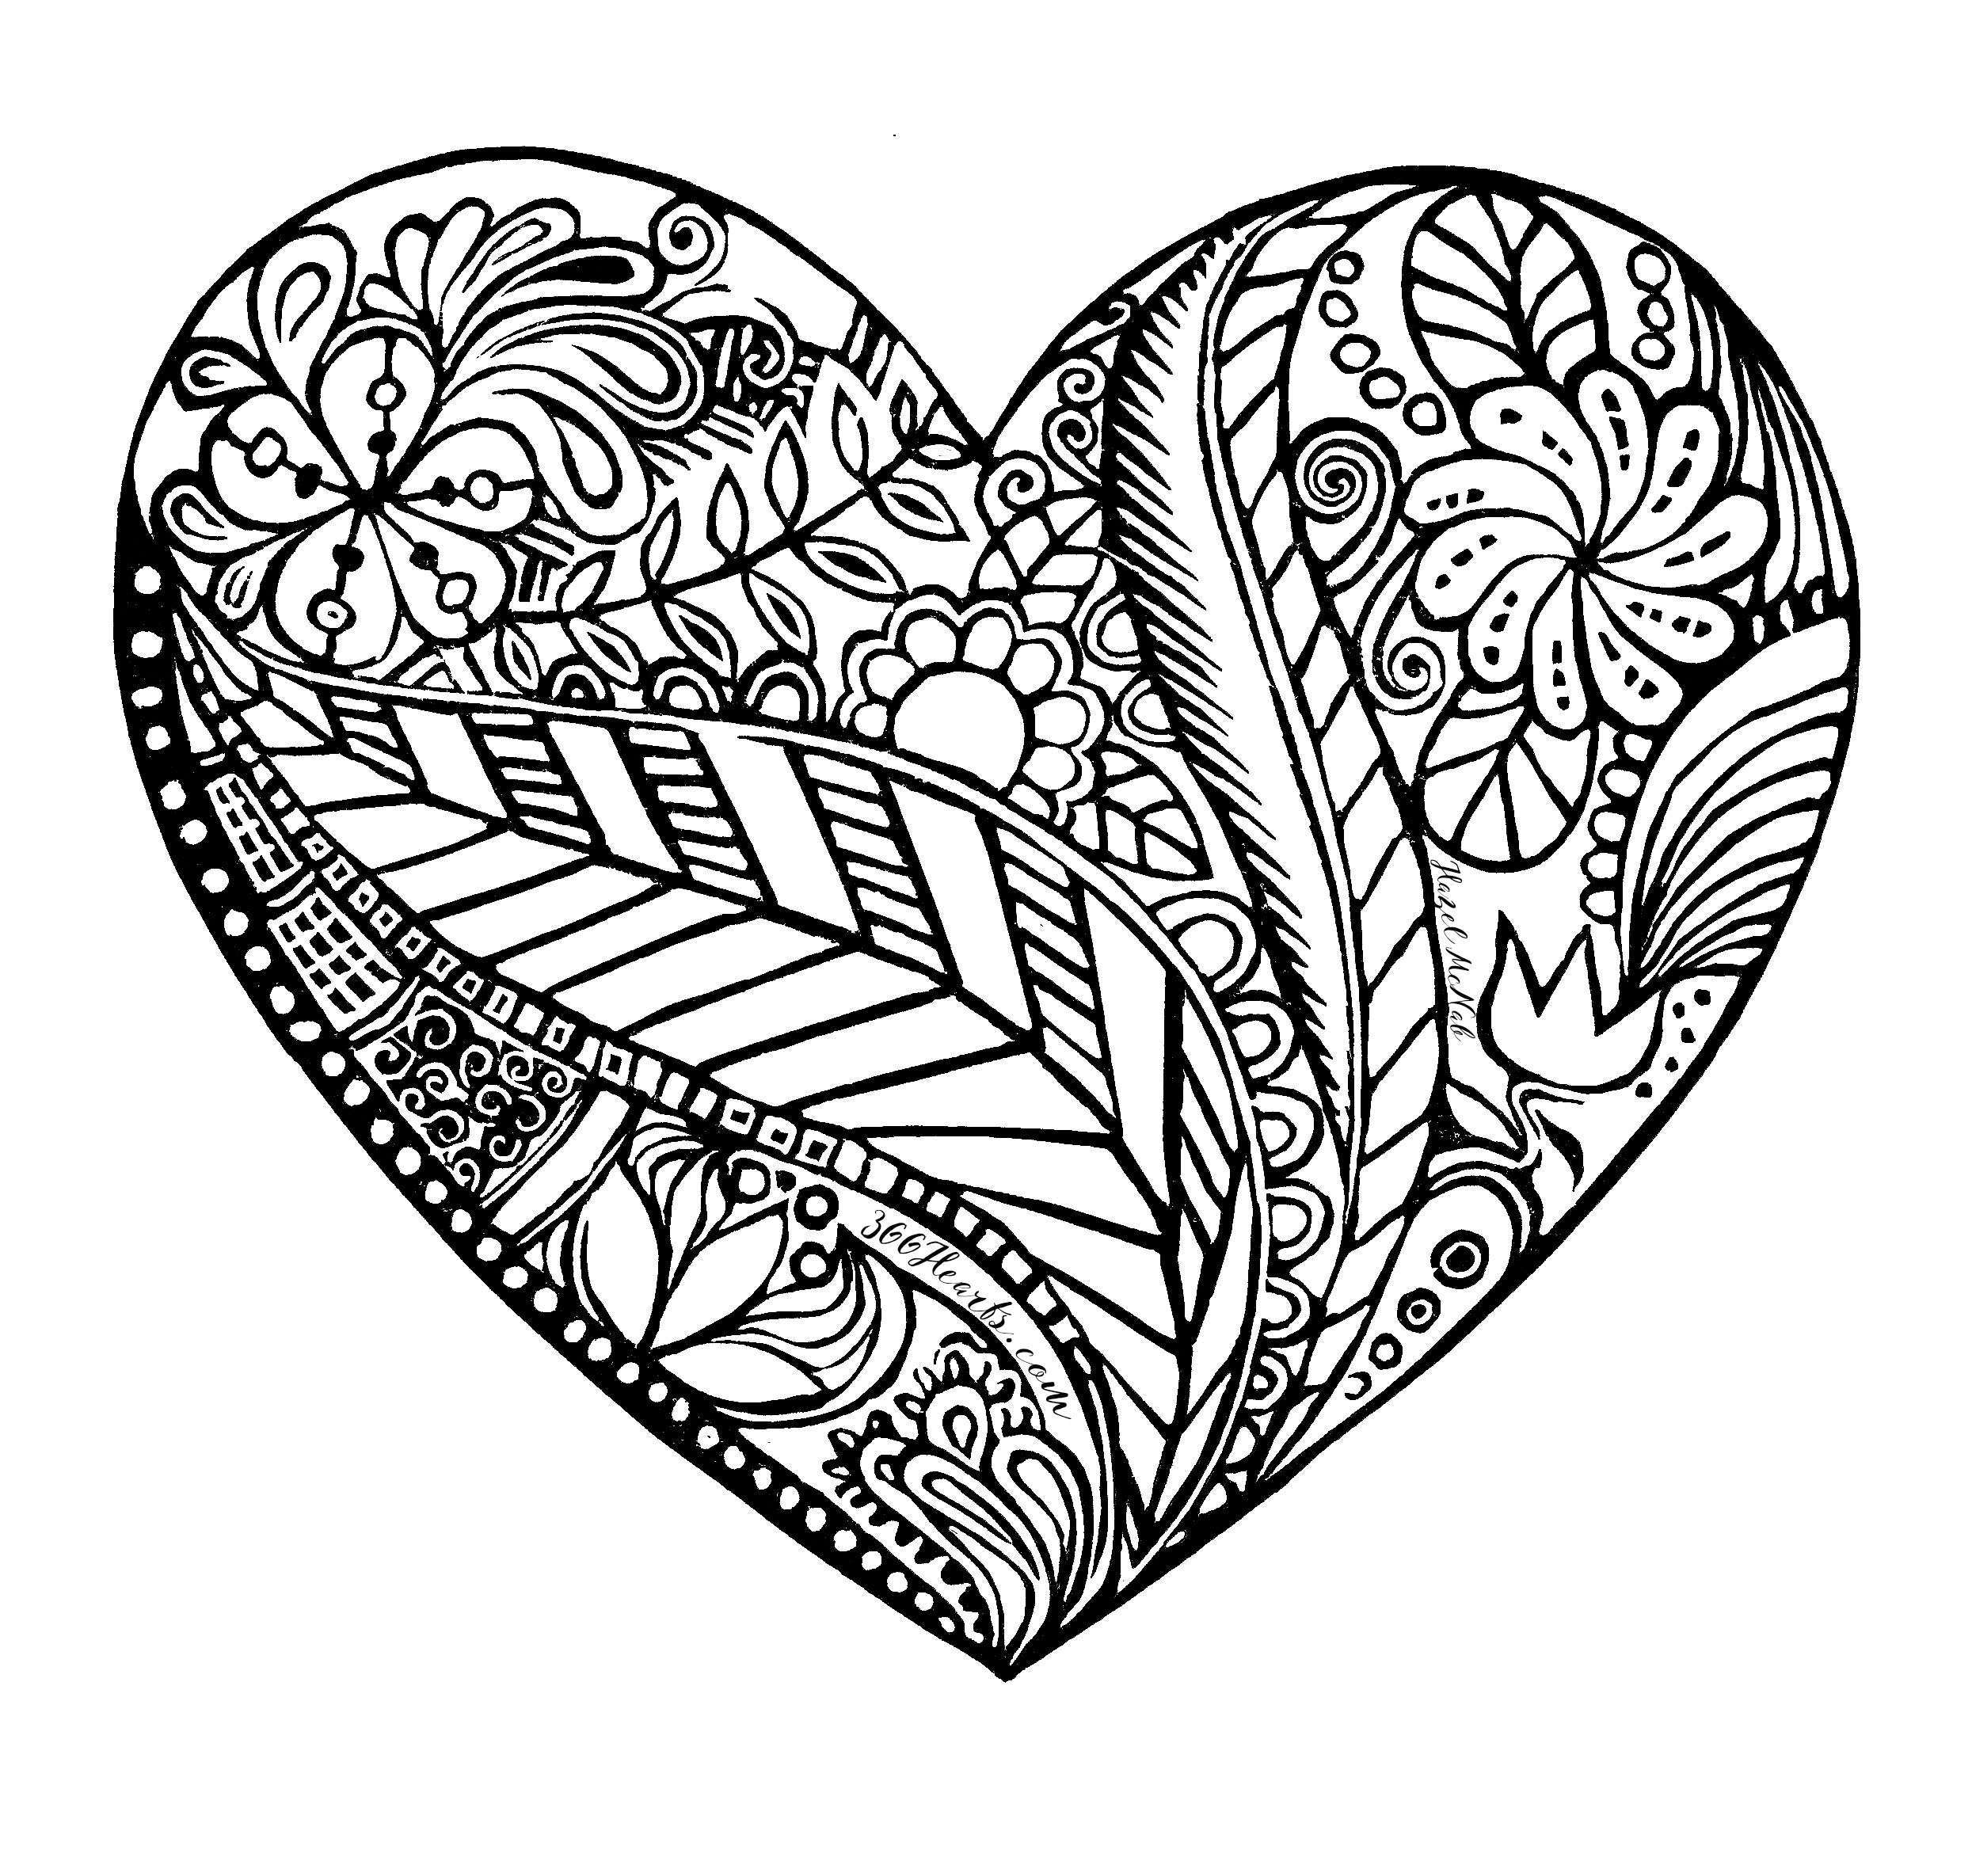 Free Heart Coloring Pages at GetDrawings Free download